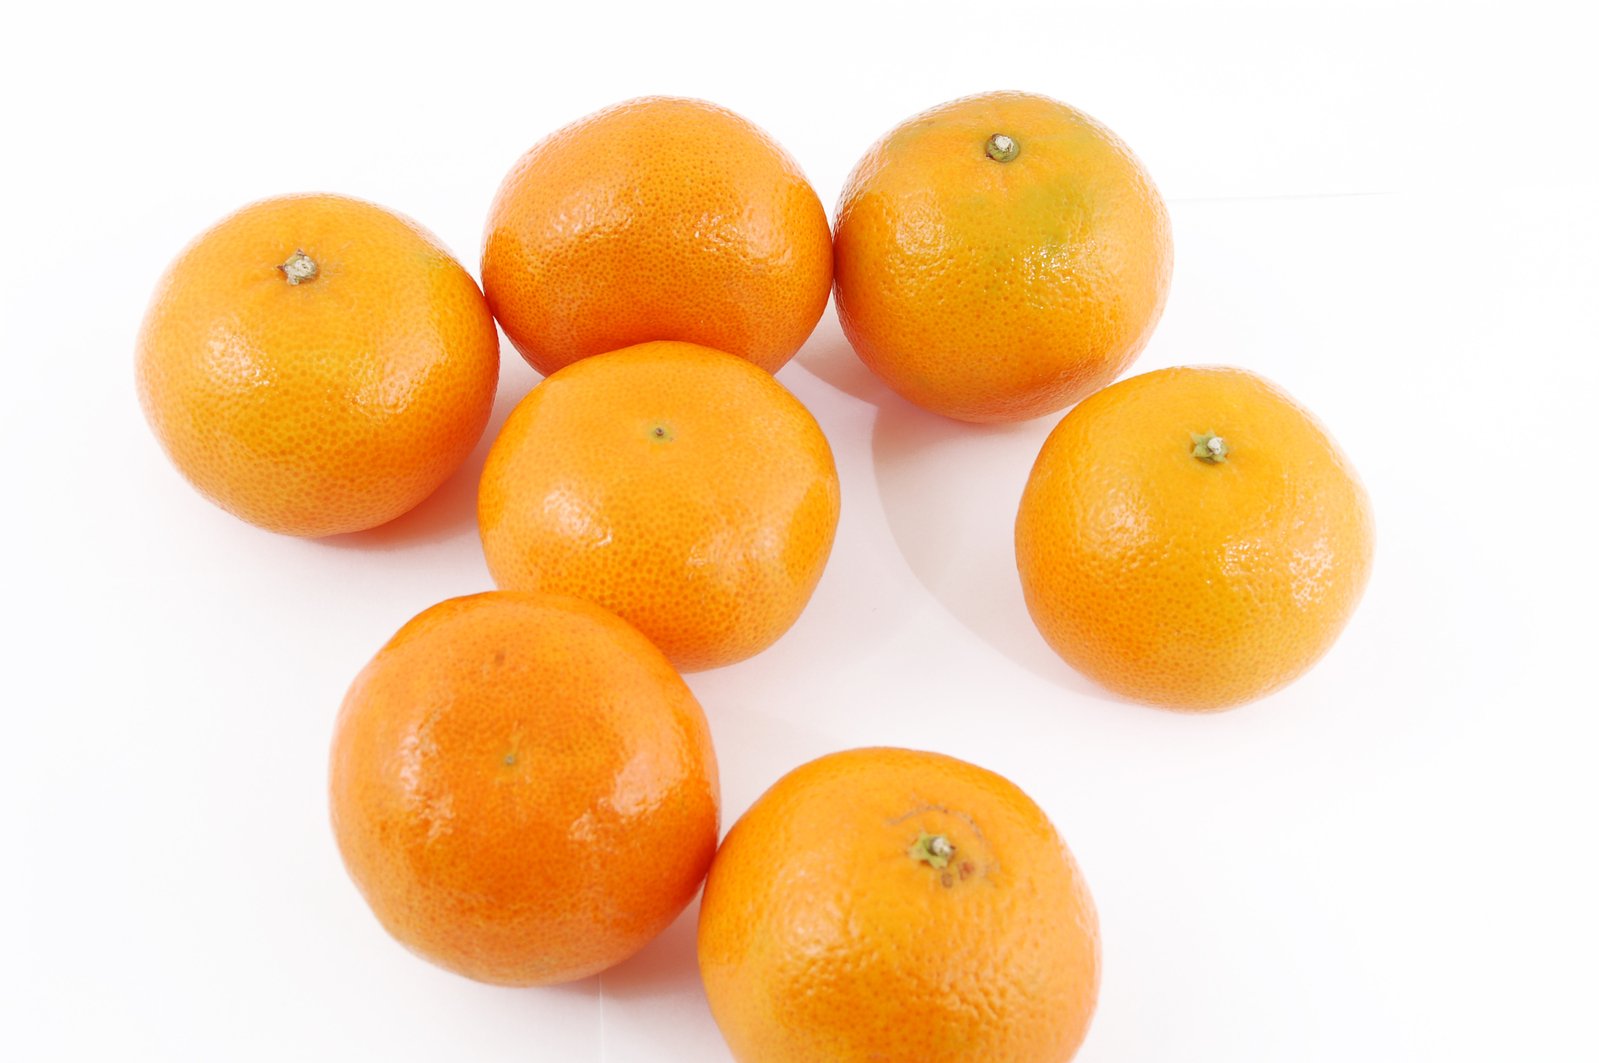 five oranges of various sizes sitting on a table